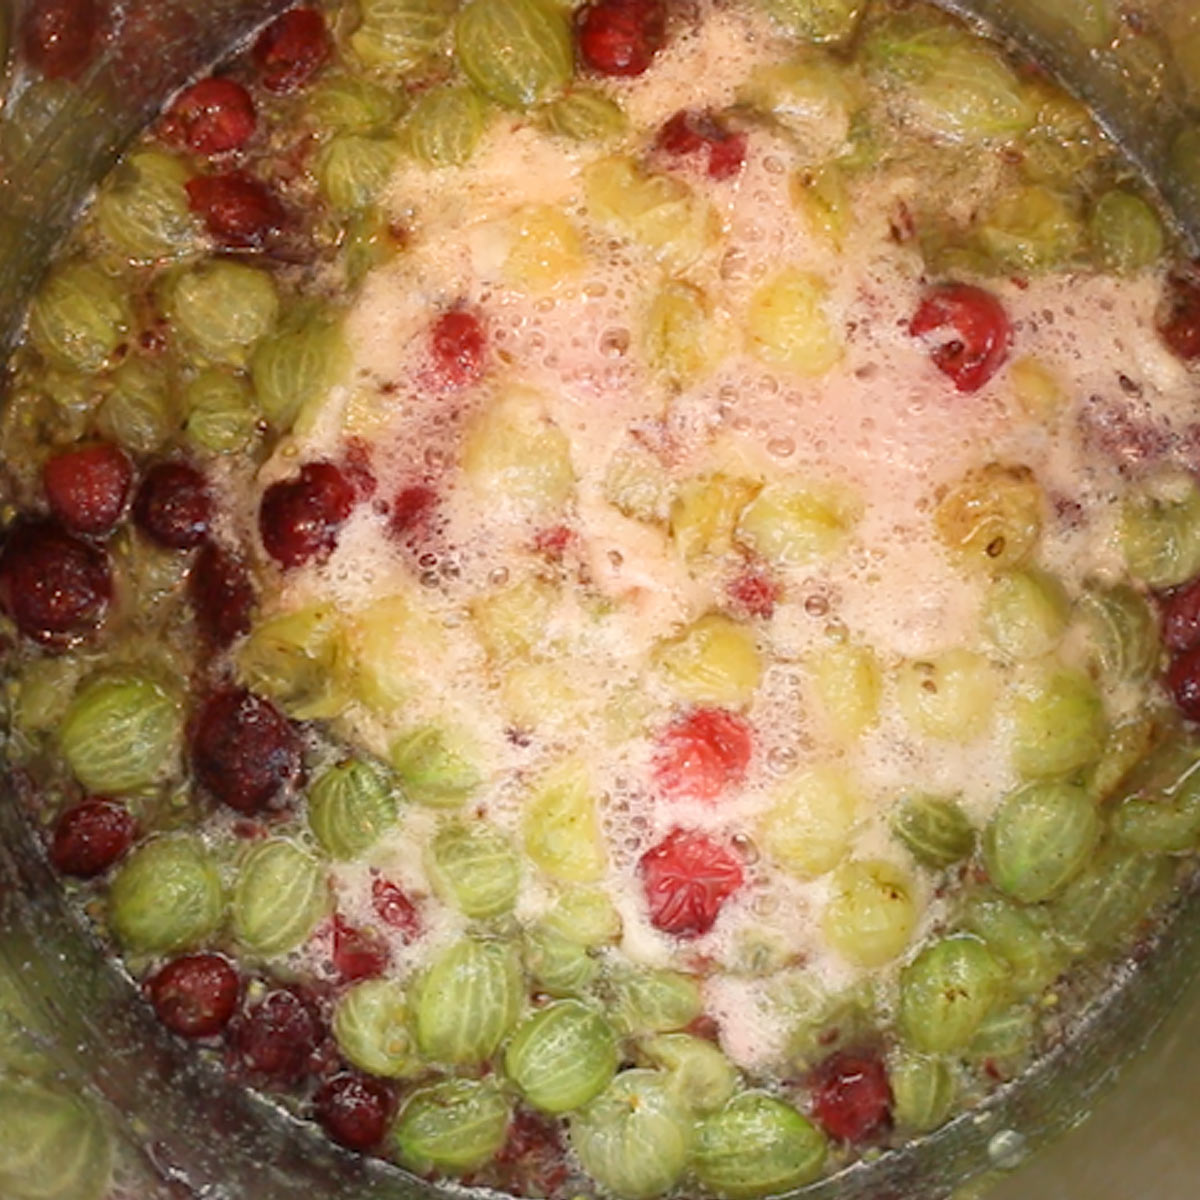 bringing gooseberries to a rolling boil with sugar